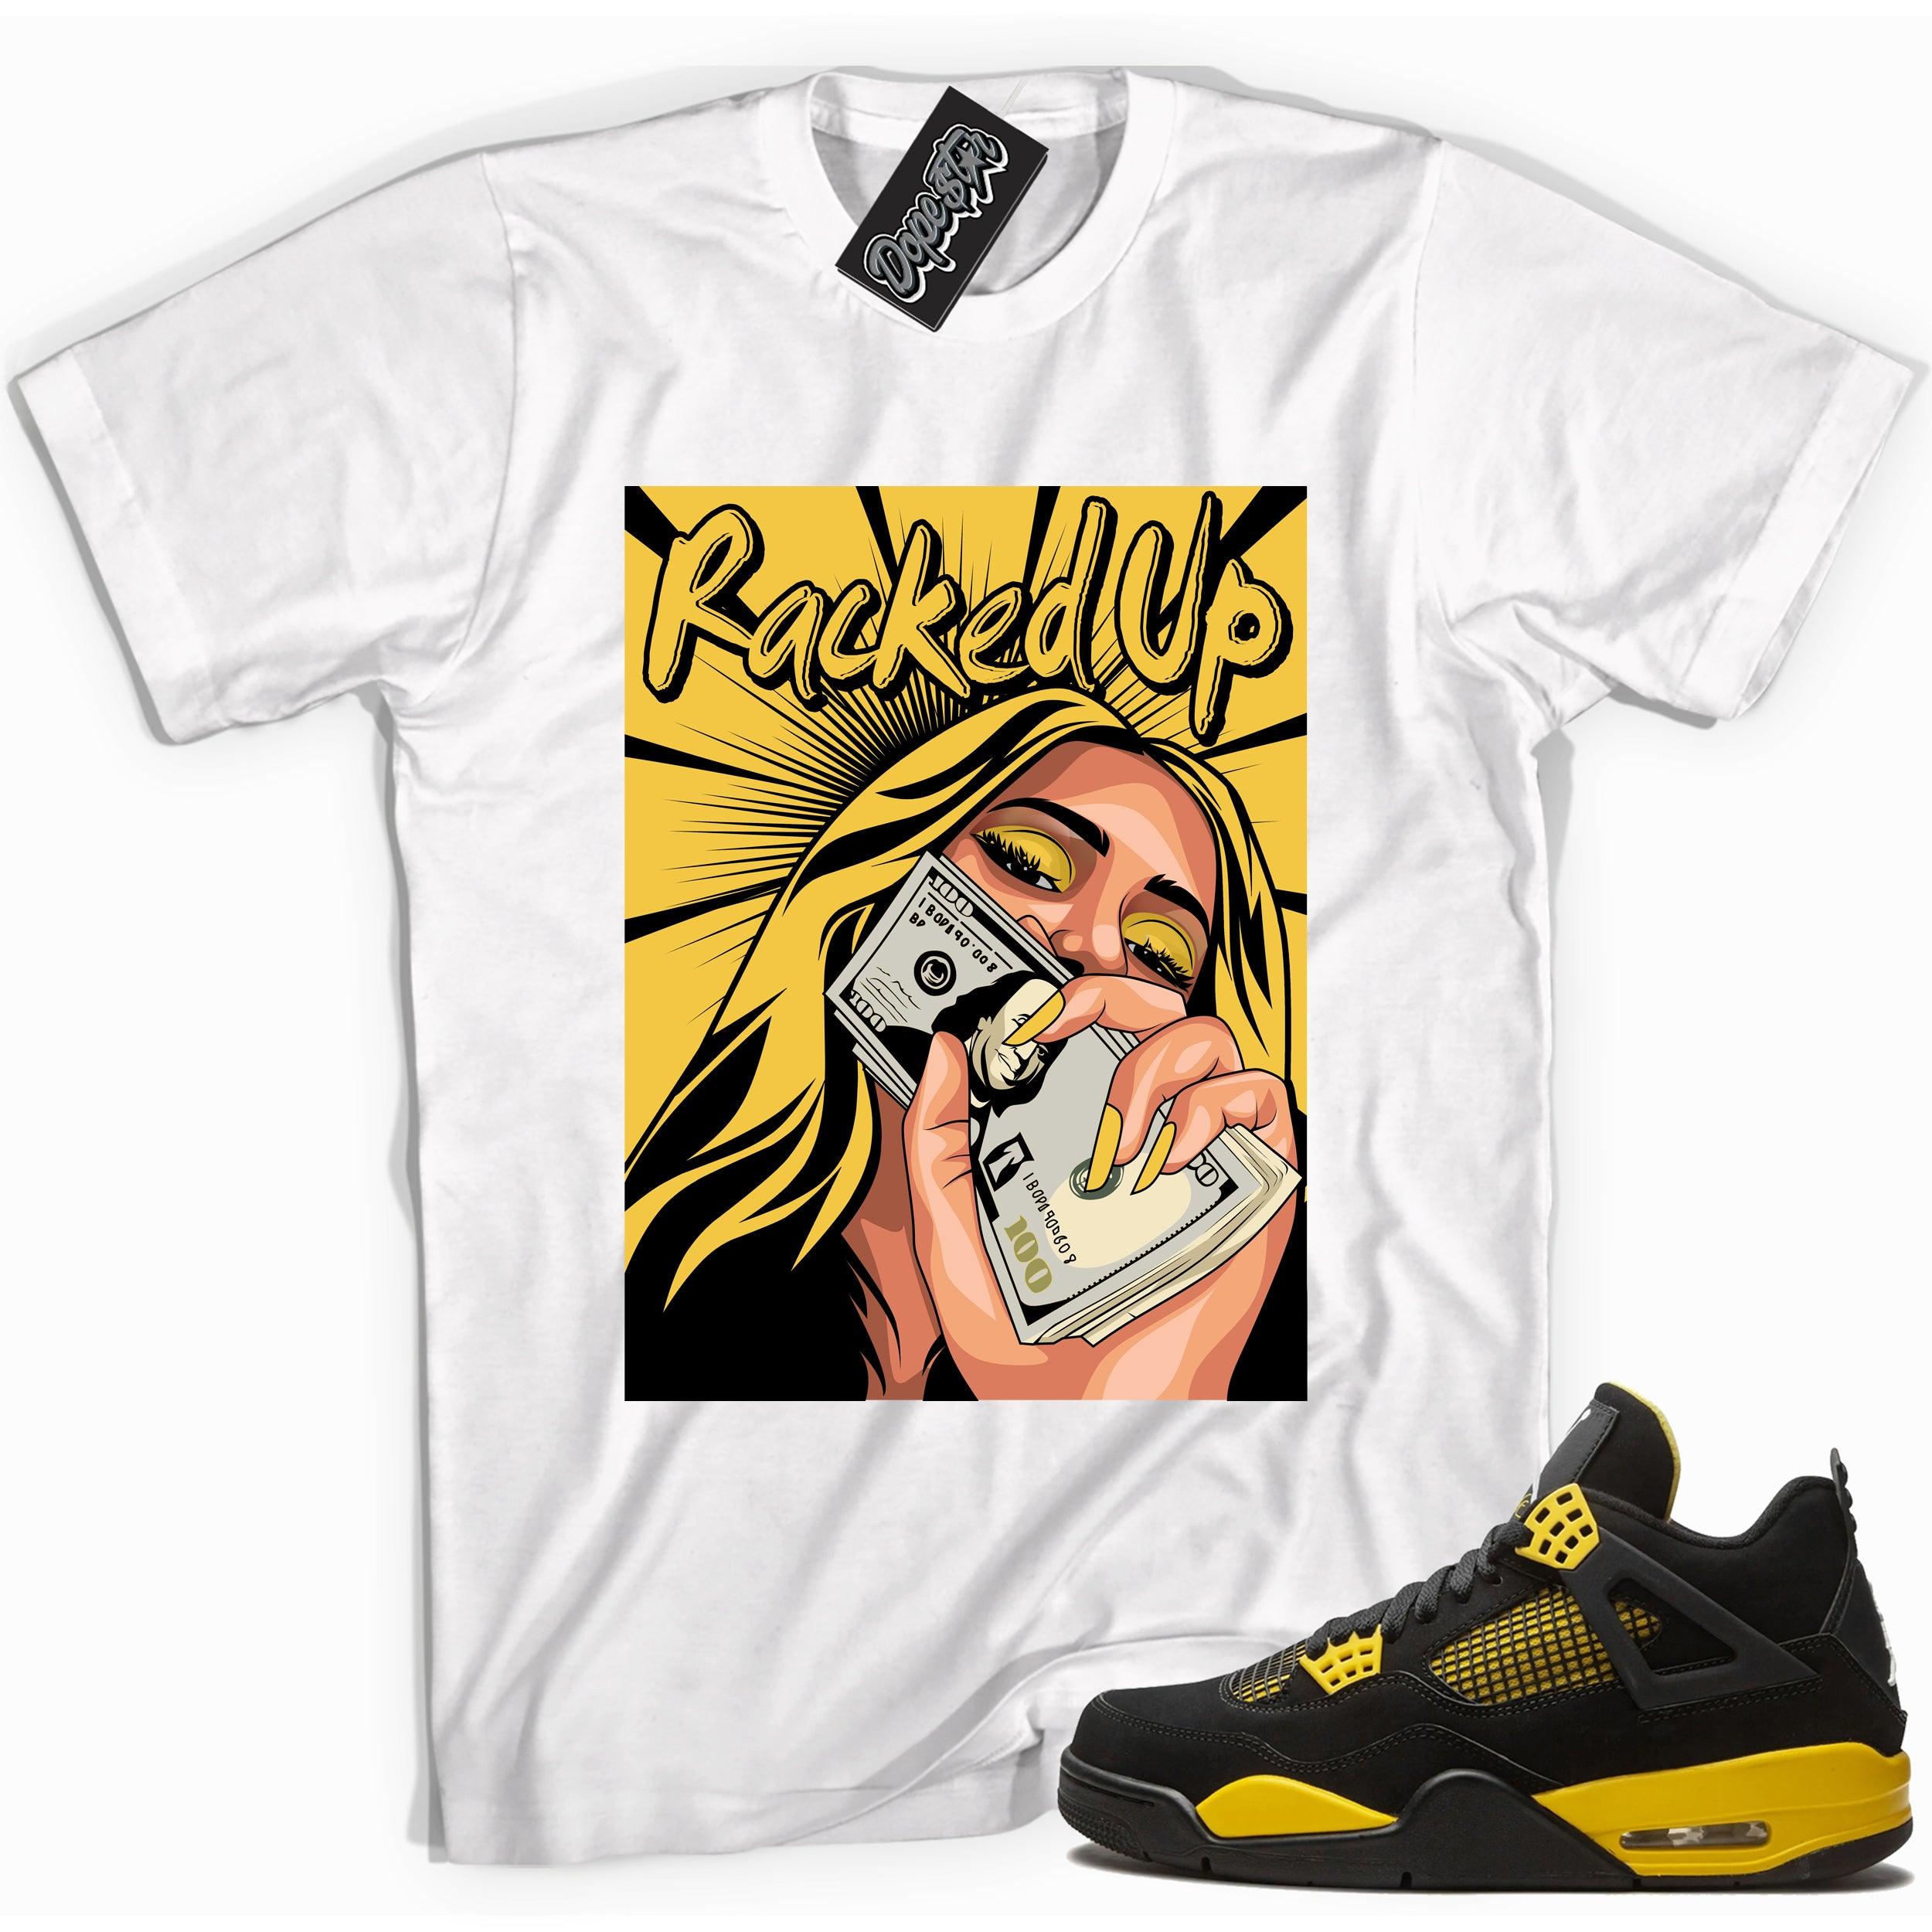 Cool white  graphic tee with 'racked up' print, that perfectly matches Air Jordan 4 Thunder sneakers